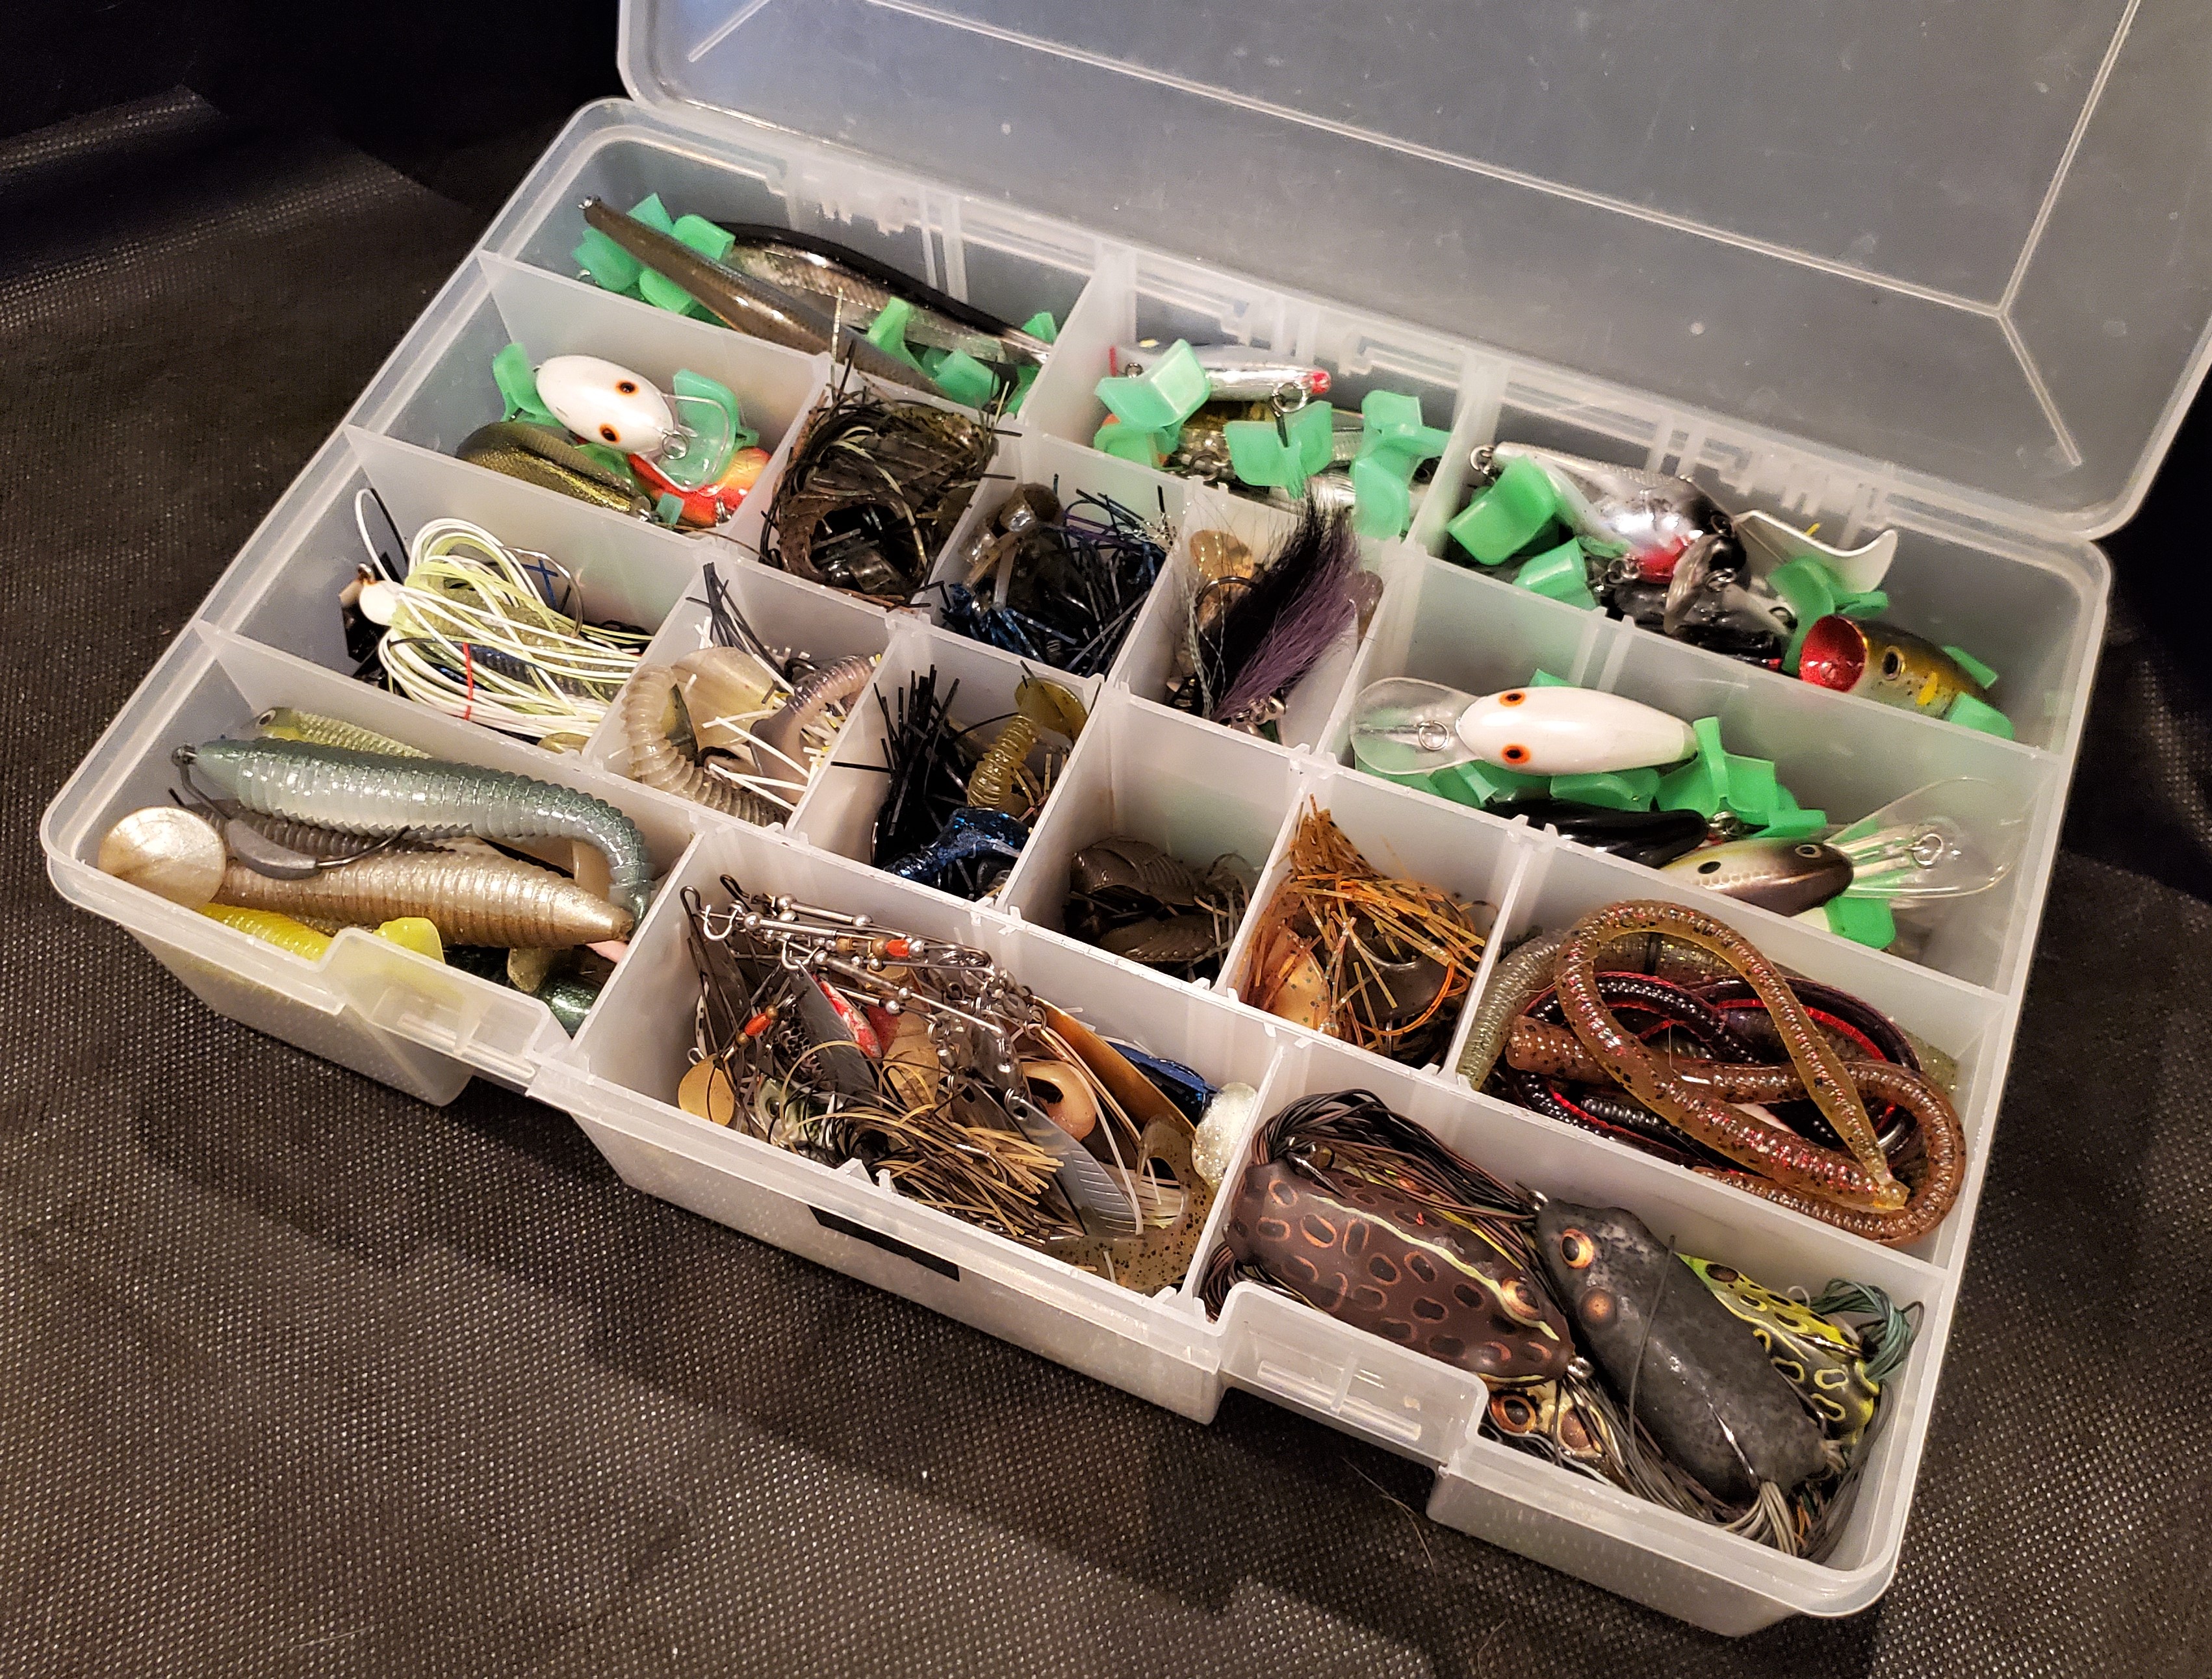 Fishing tackle in a tackle box